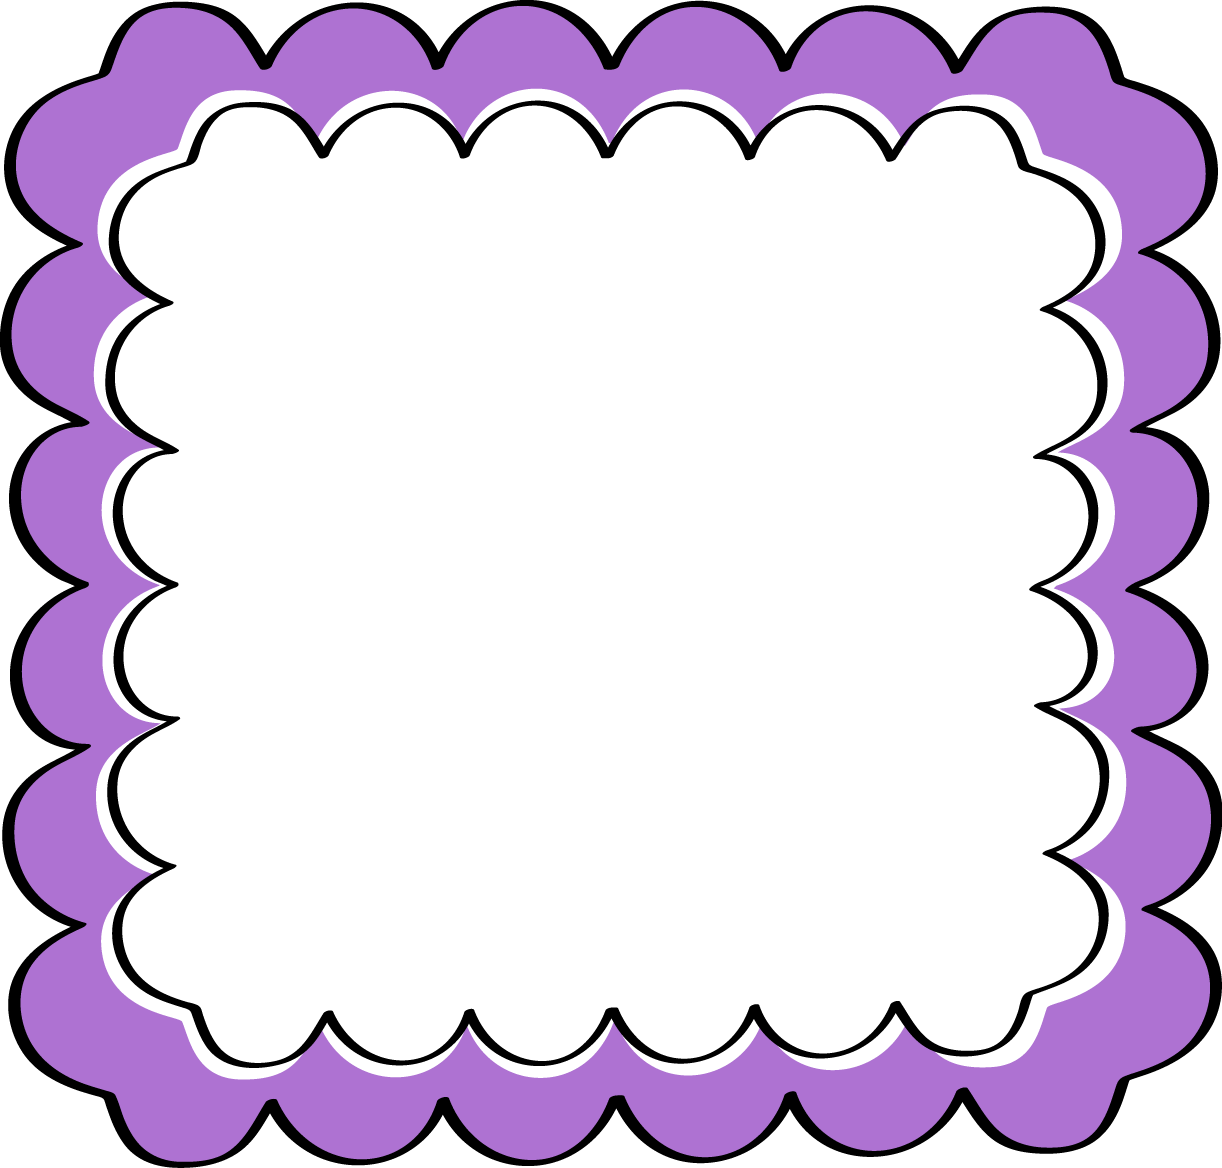 clipart borders and frames - photo #40